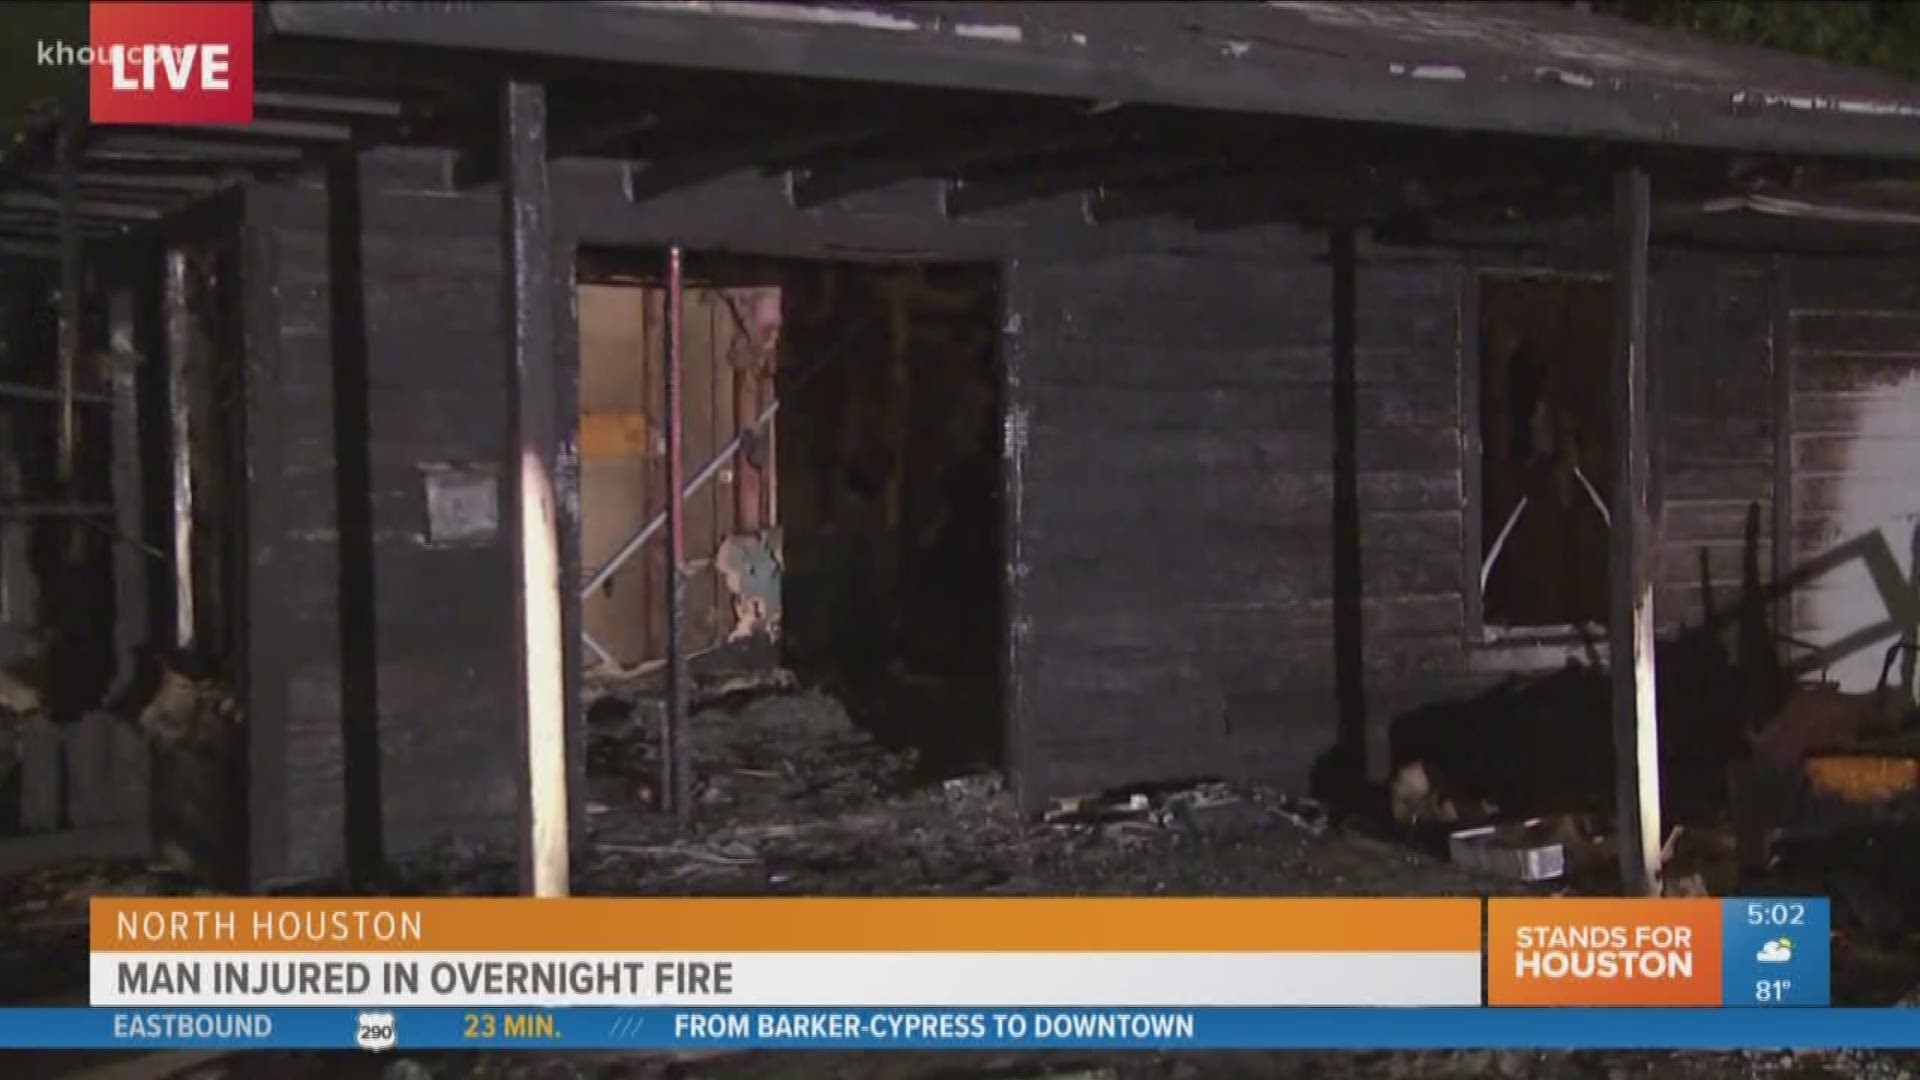 A man was hospitalized with severe burns after he escaped flames and smoke in his home.